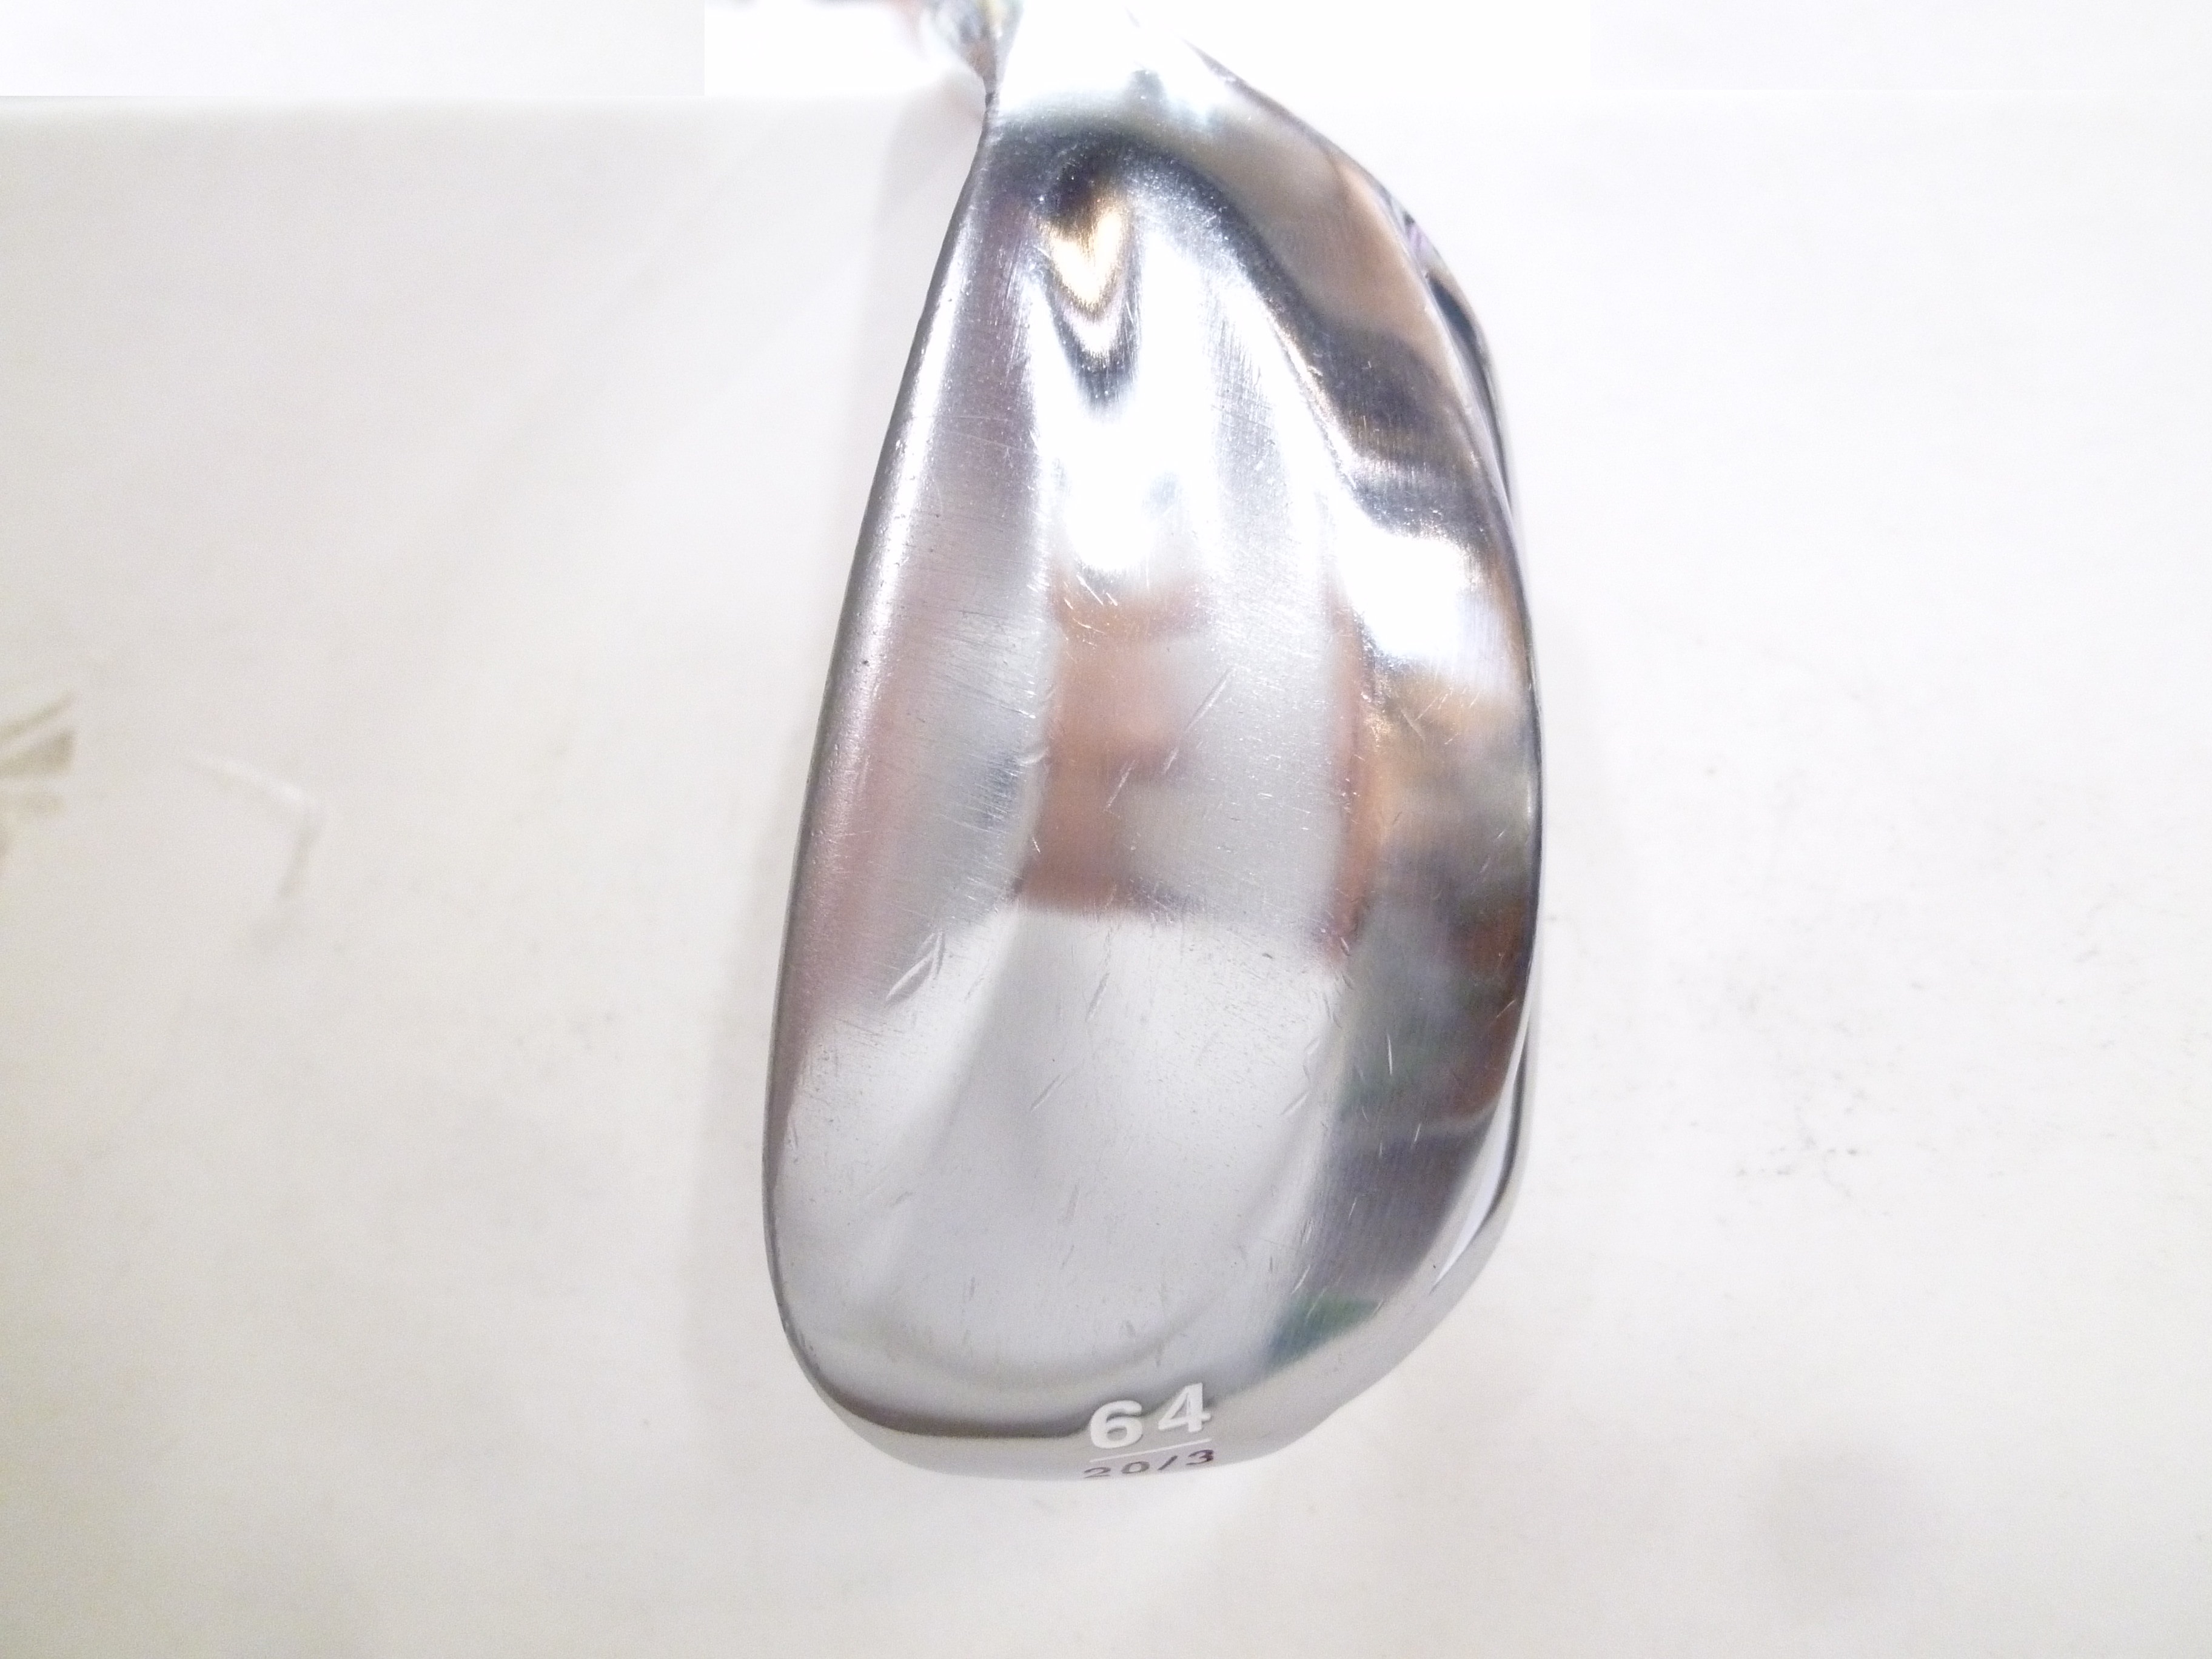  used lady's single goods Wedge ONOFFonofWEDGE LADY FROG*S frog sLEAP-IISMOOTH KICK LP-421I[L]64 times *MP@1*N*223